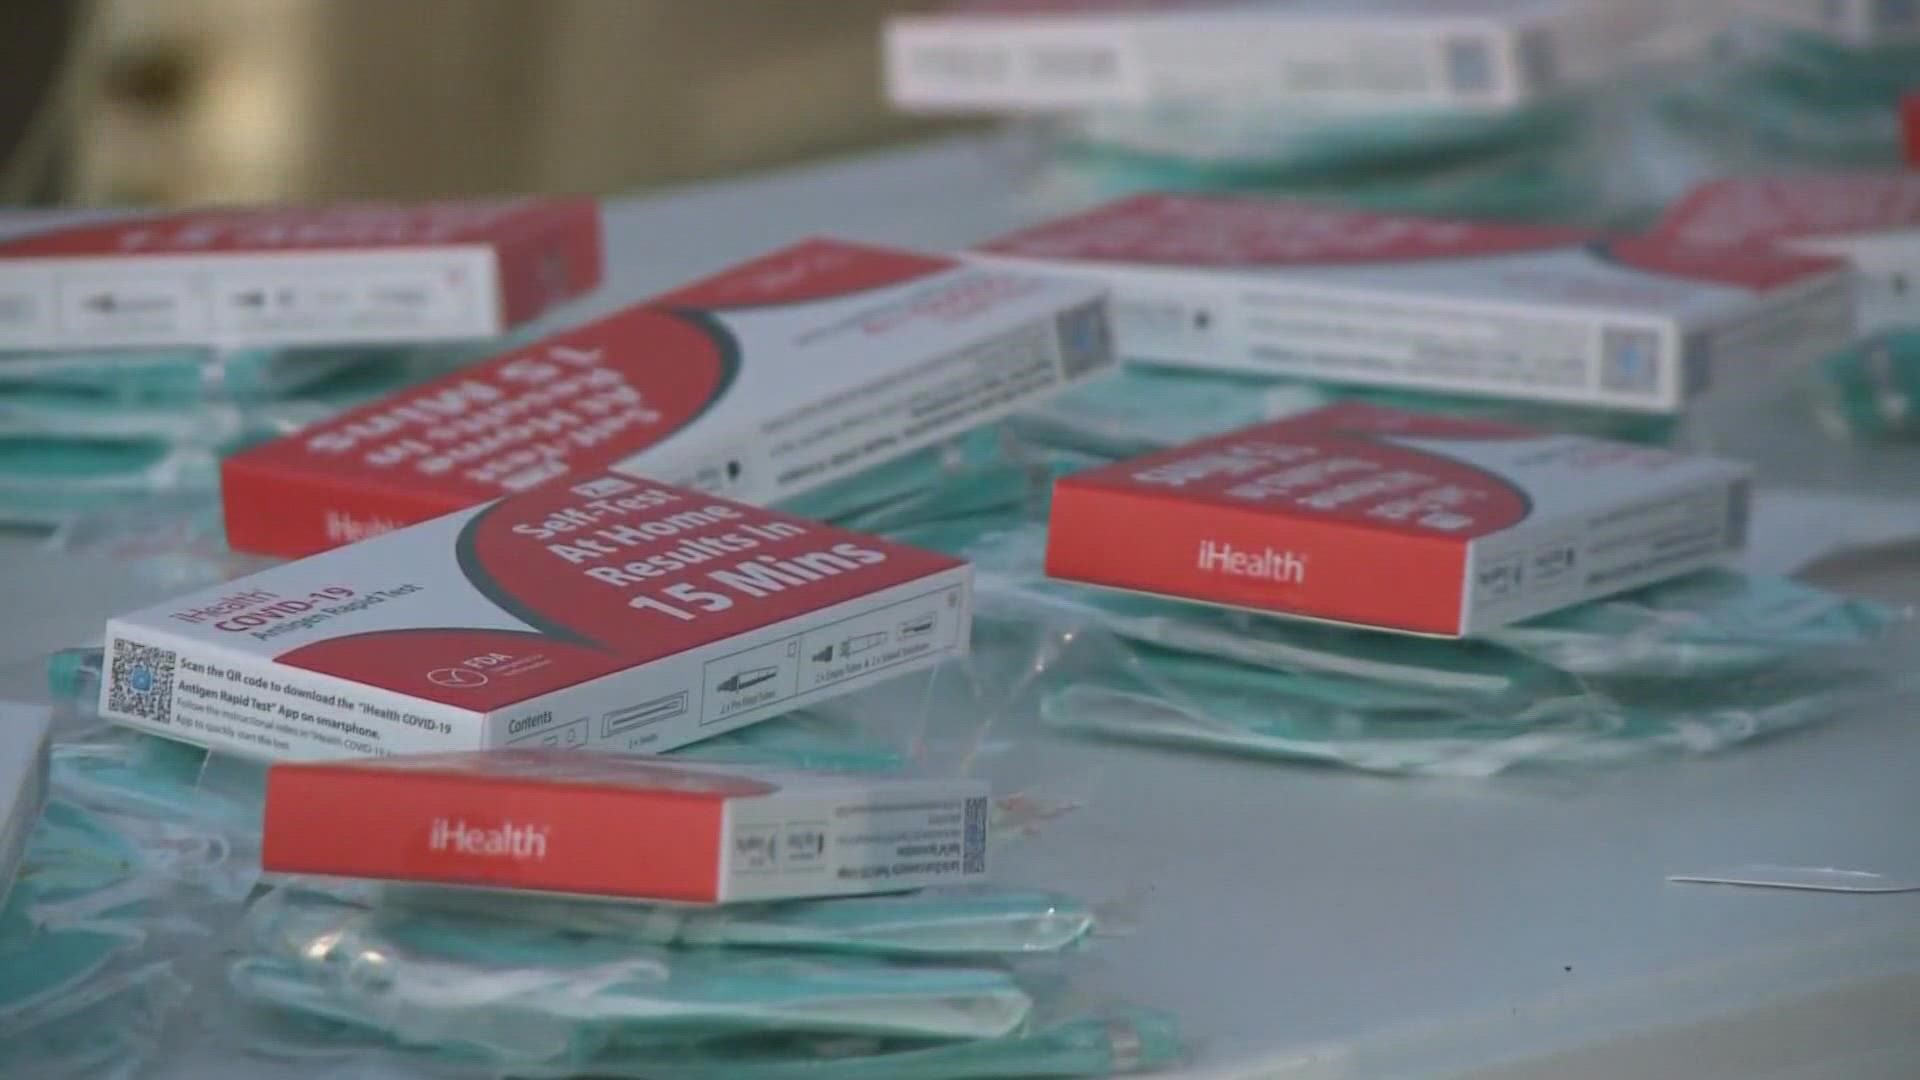 With the use of home tests, the state Department of Health said only a fraction of COVID-19 cases are being reported to officials.